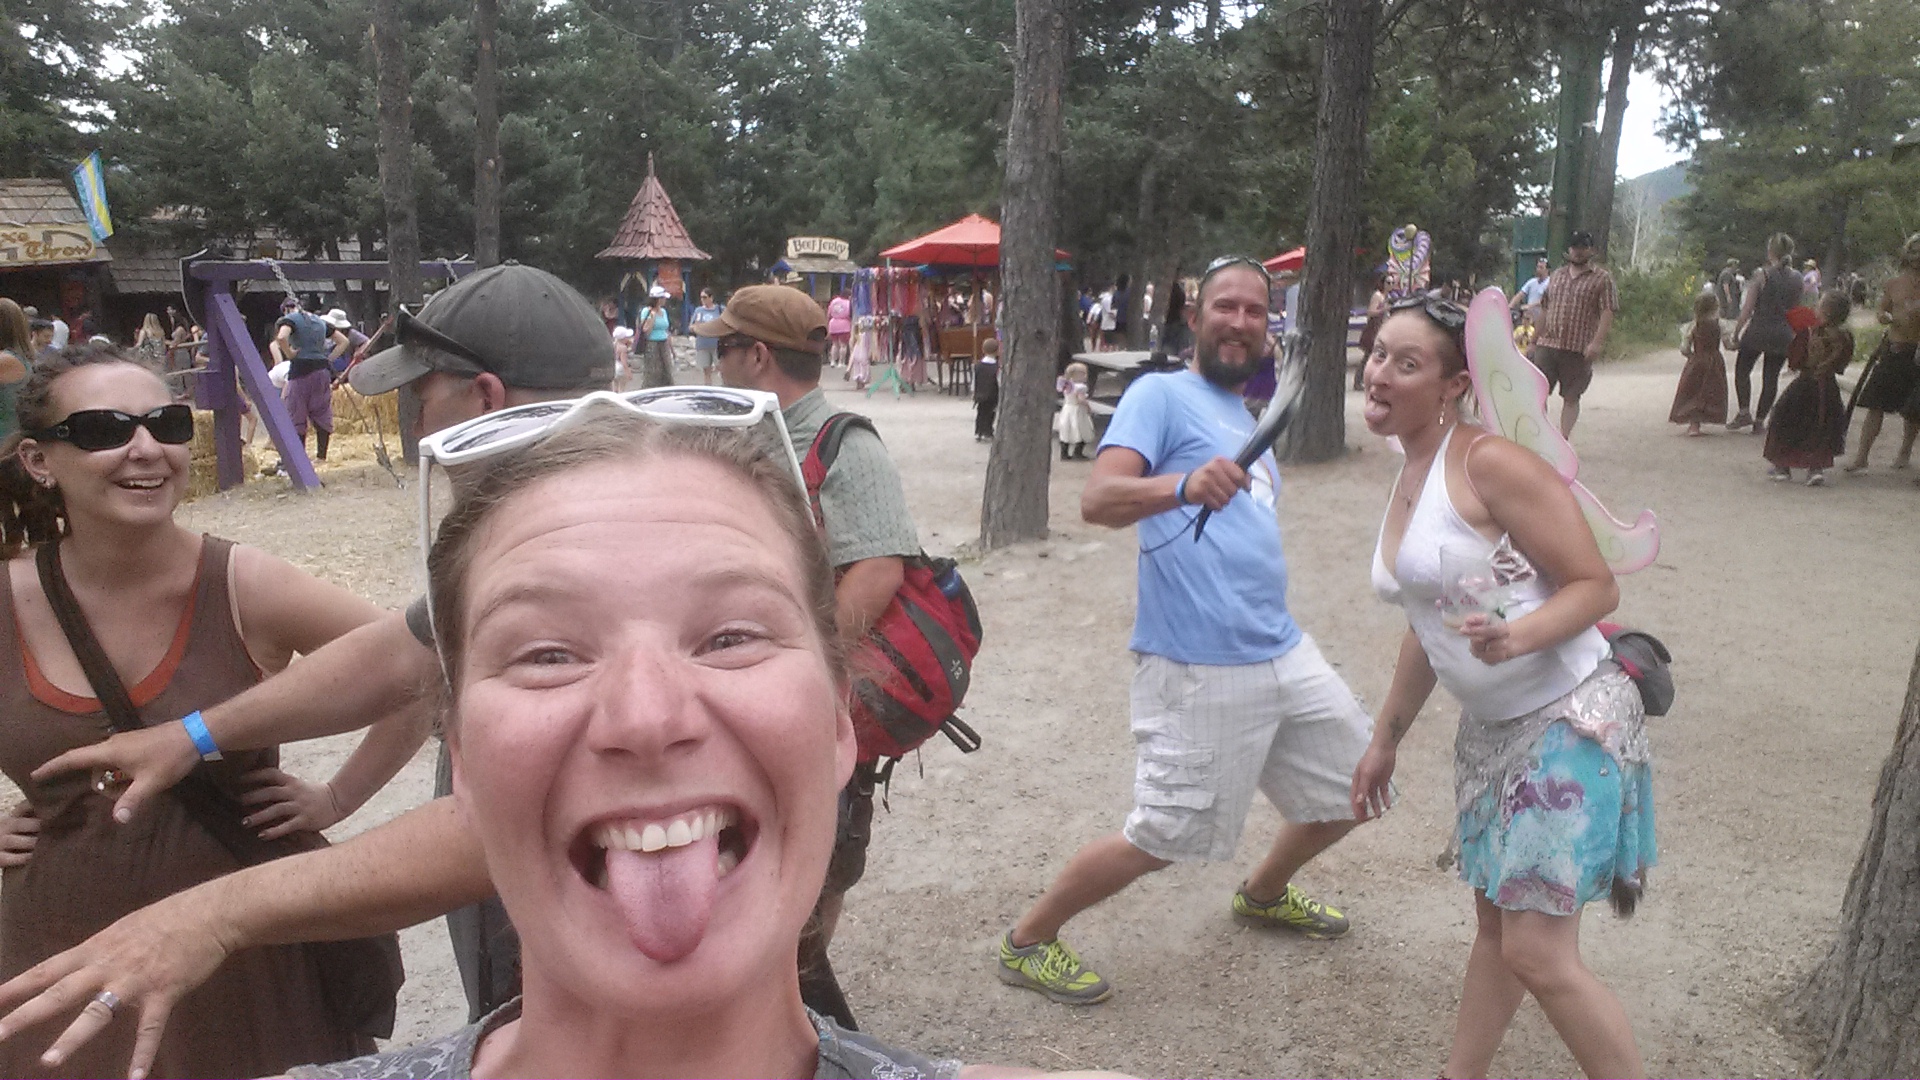 At the Denver Renaissance Festival. Where, a few weeks later, a fellow got so drunk at the joust he decided to join in.